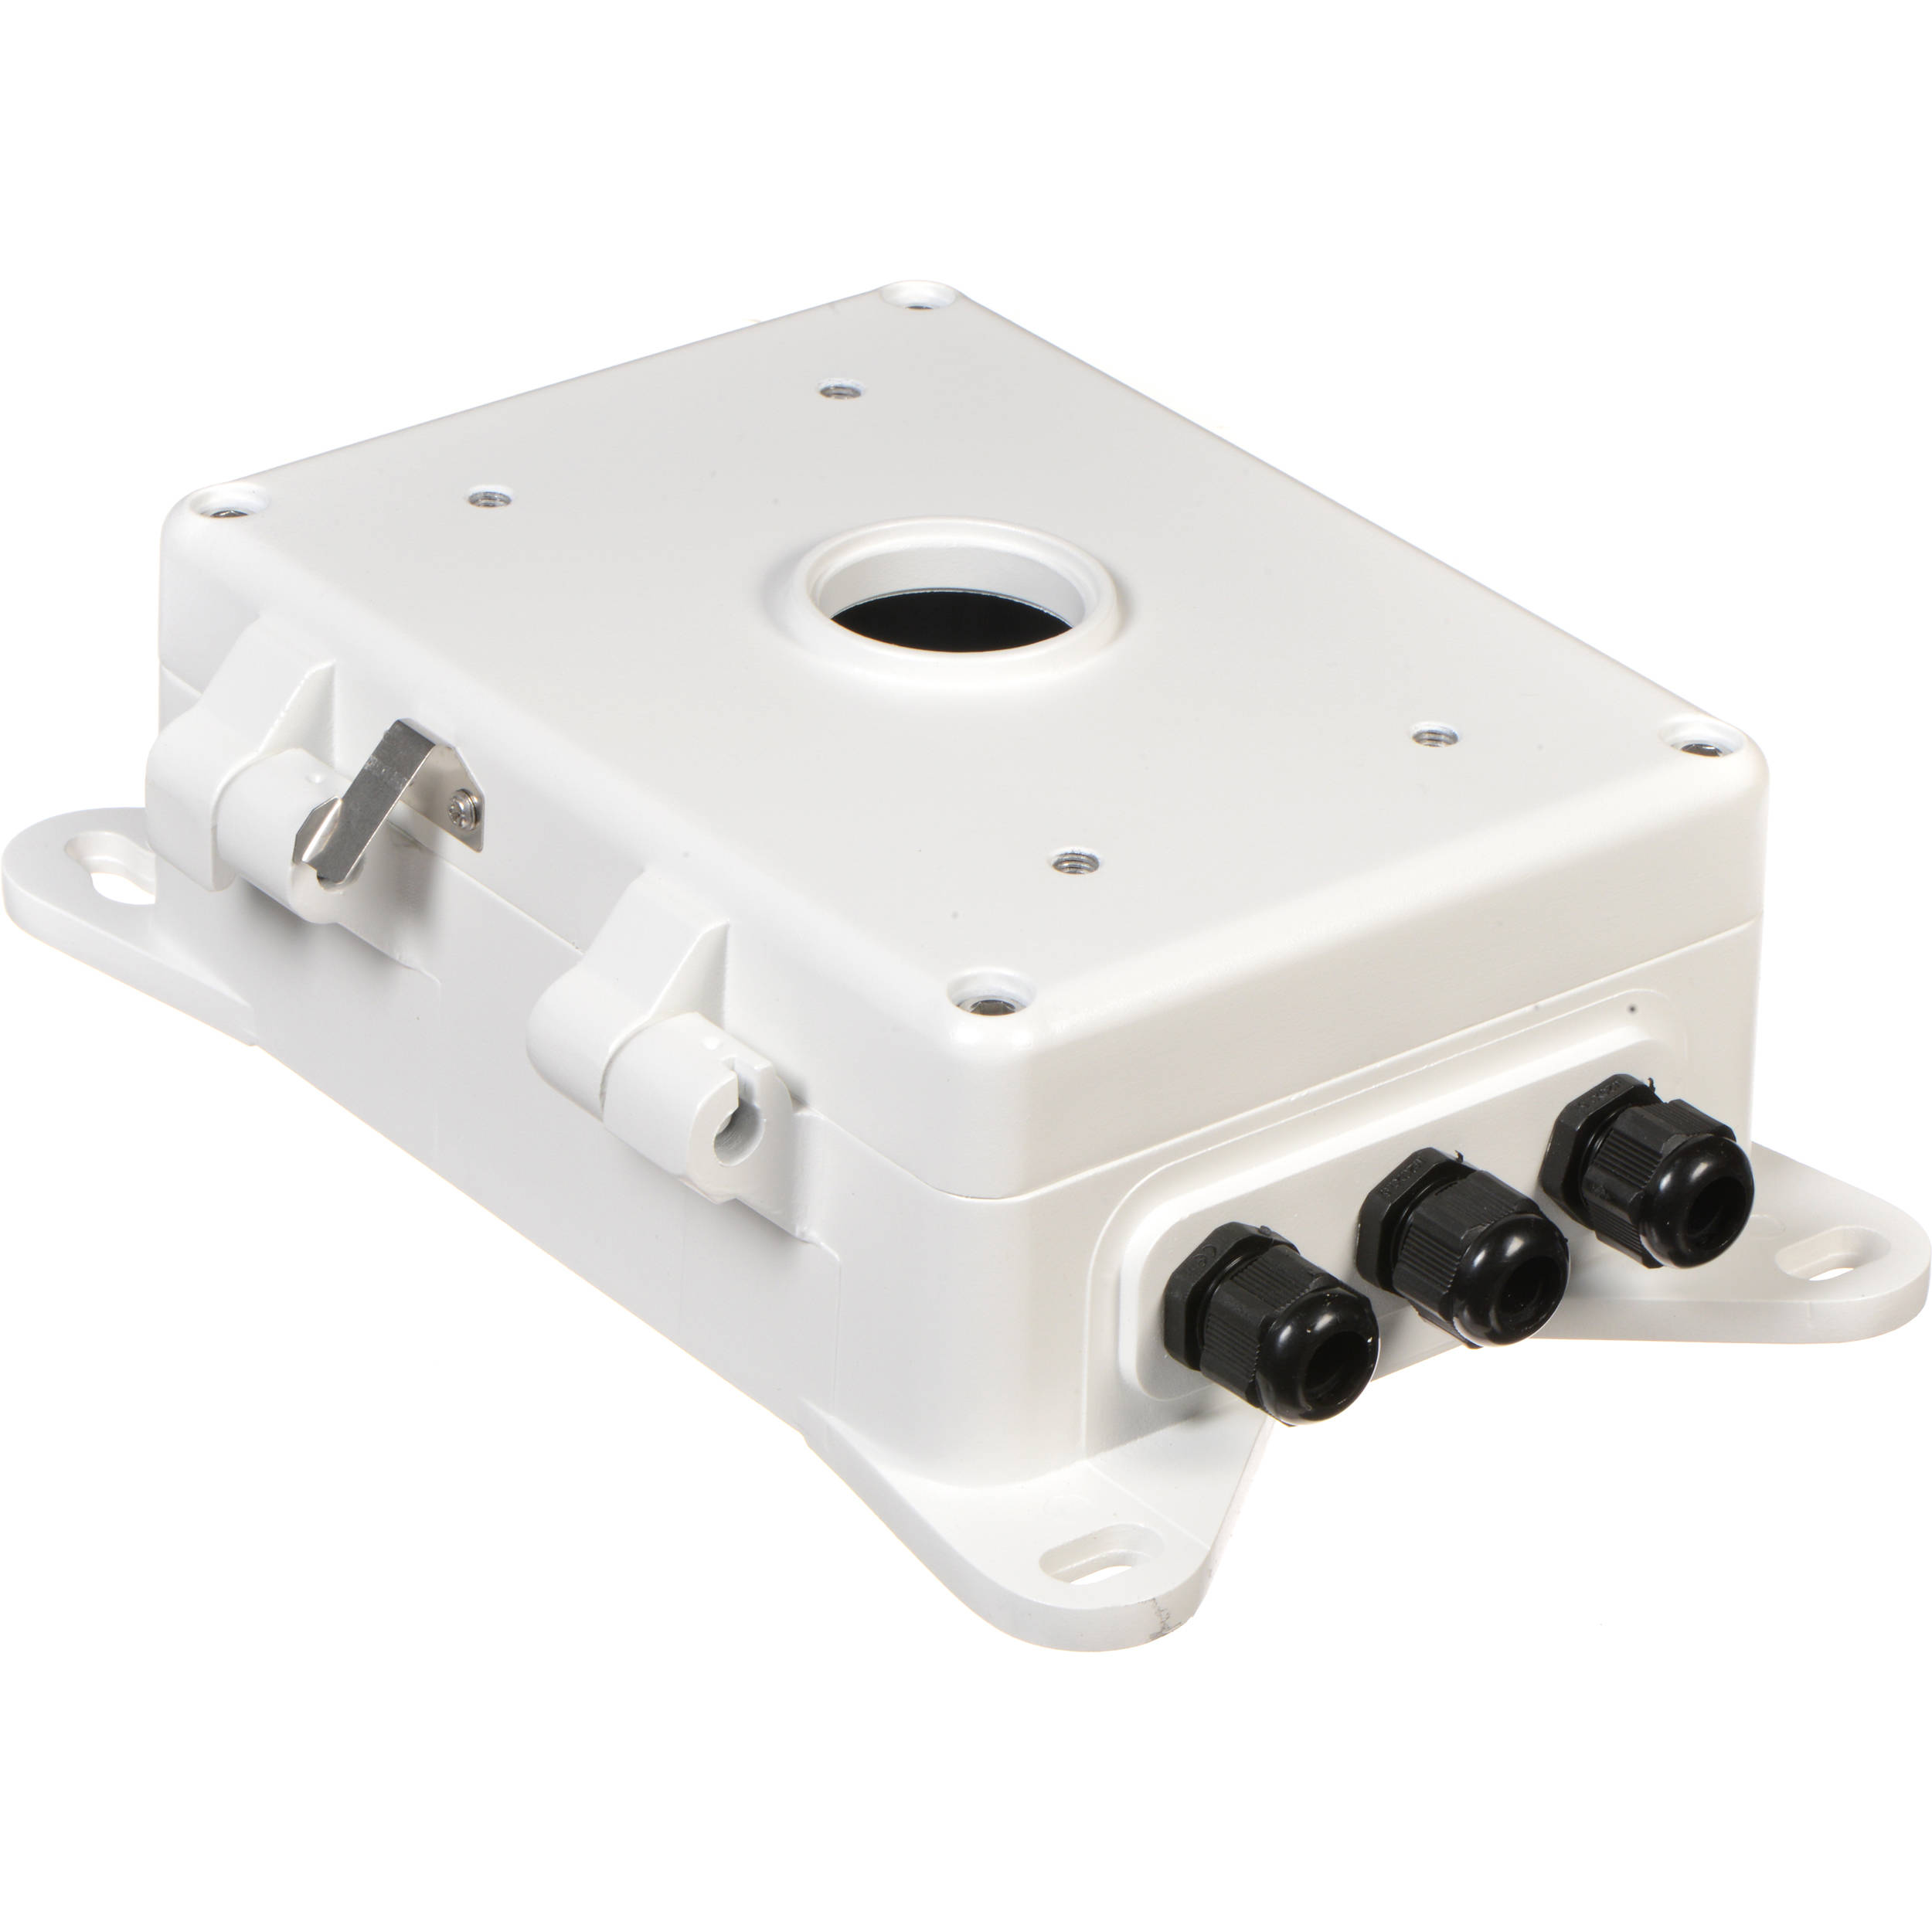 hikvision junction box